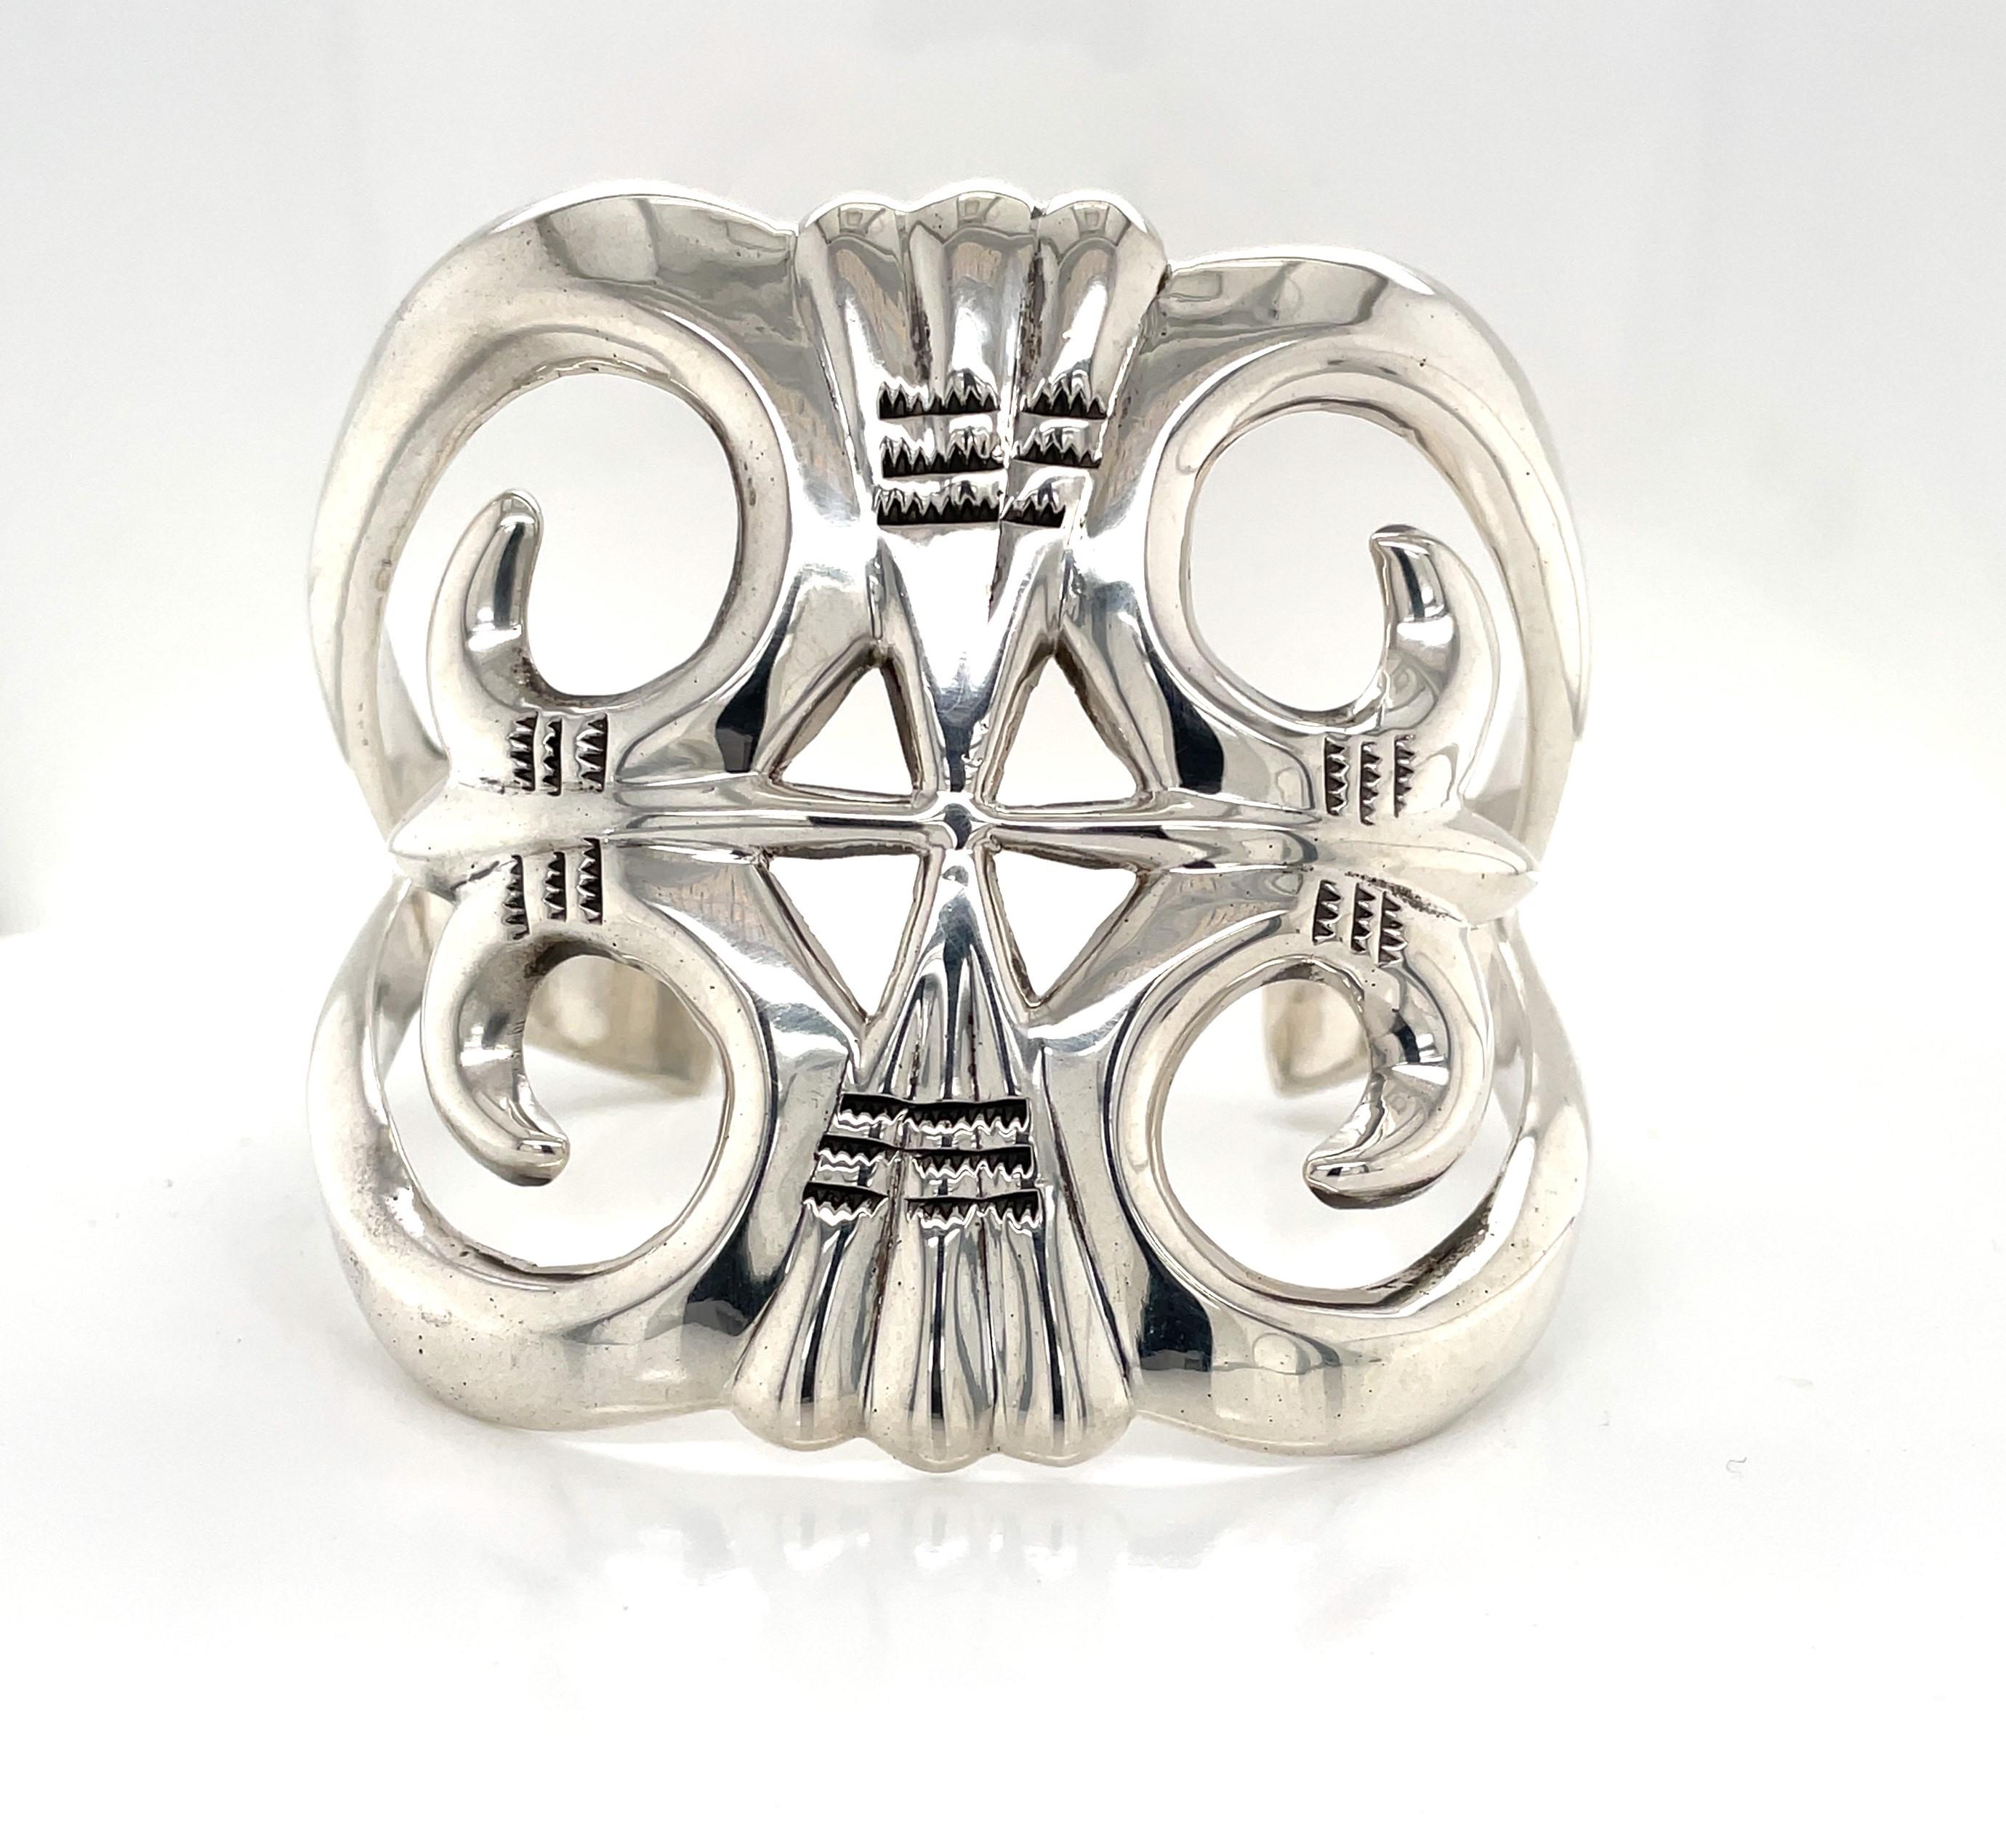 Bold in design and crafted of substantial heft in .900 silver, this finely made artisan cuff bracelet displays an attractive Aztec design measuring a generous 2-3/8 inches wide. This large statement bracelet measures 2-3/8 inches left to right and